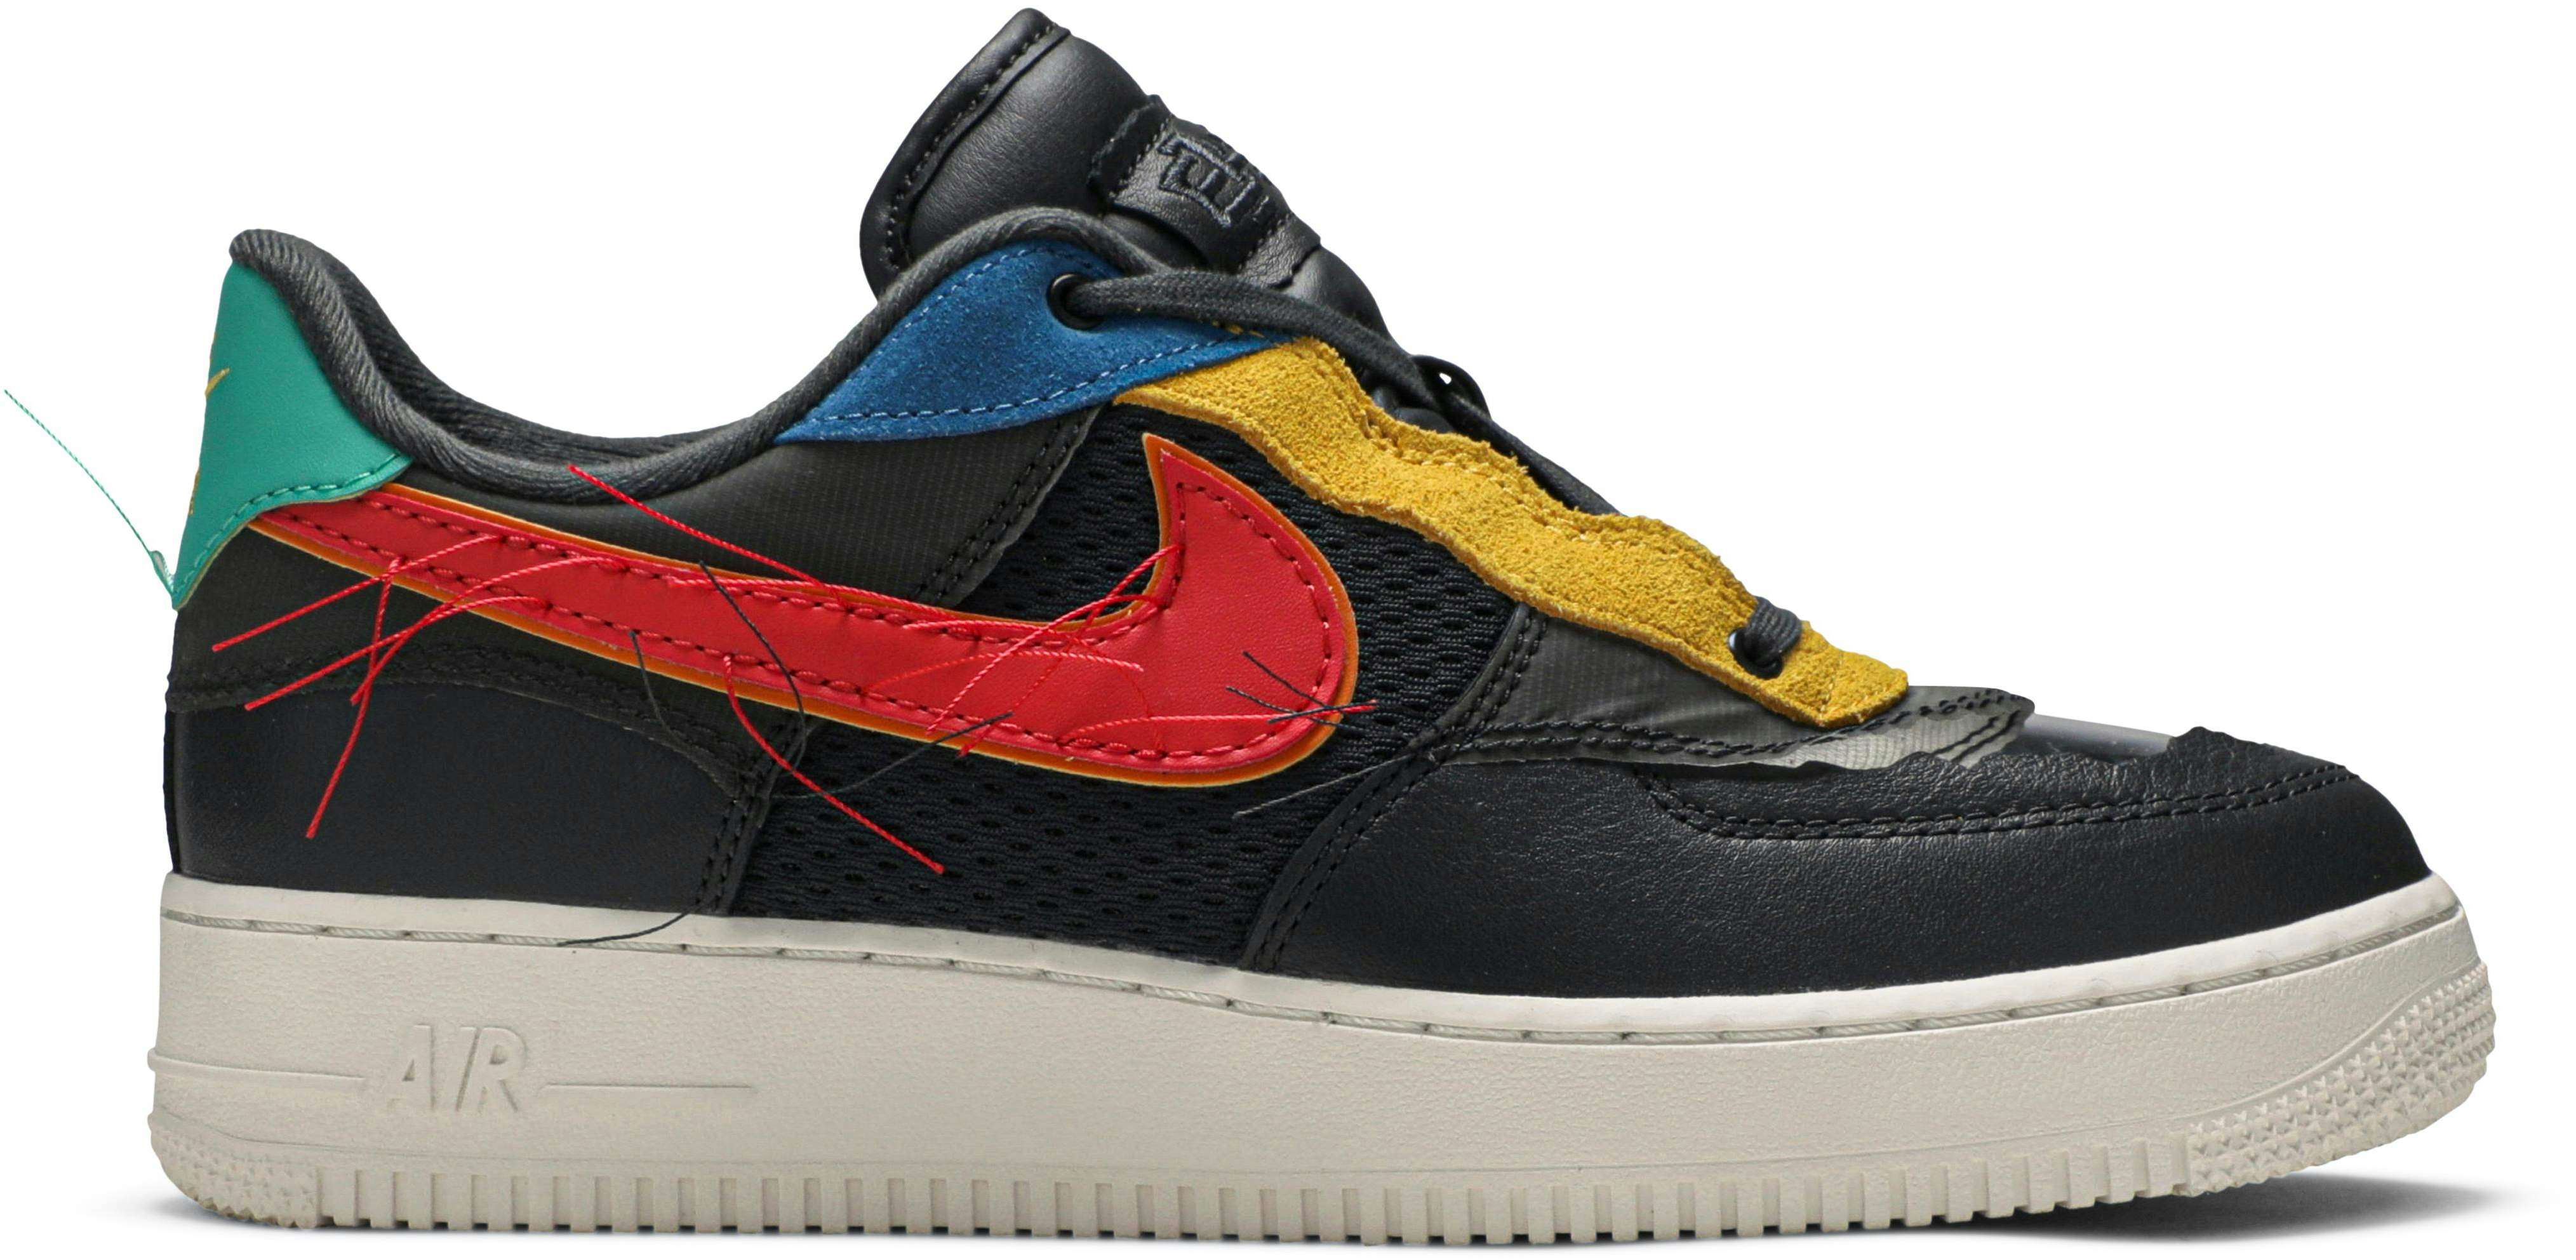 Nike Shed Light on the Air Force 1 Shadow - Sneaker Freaker